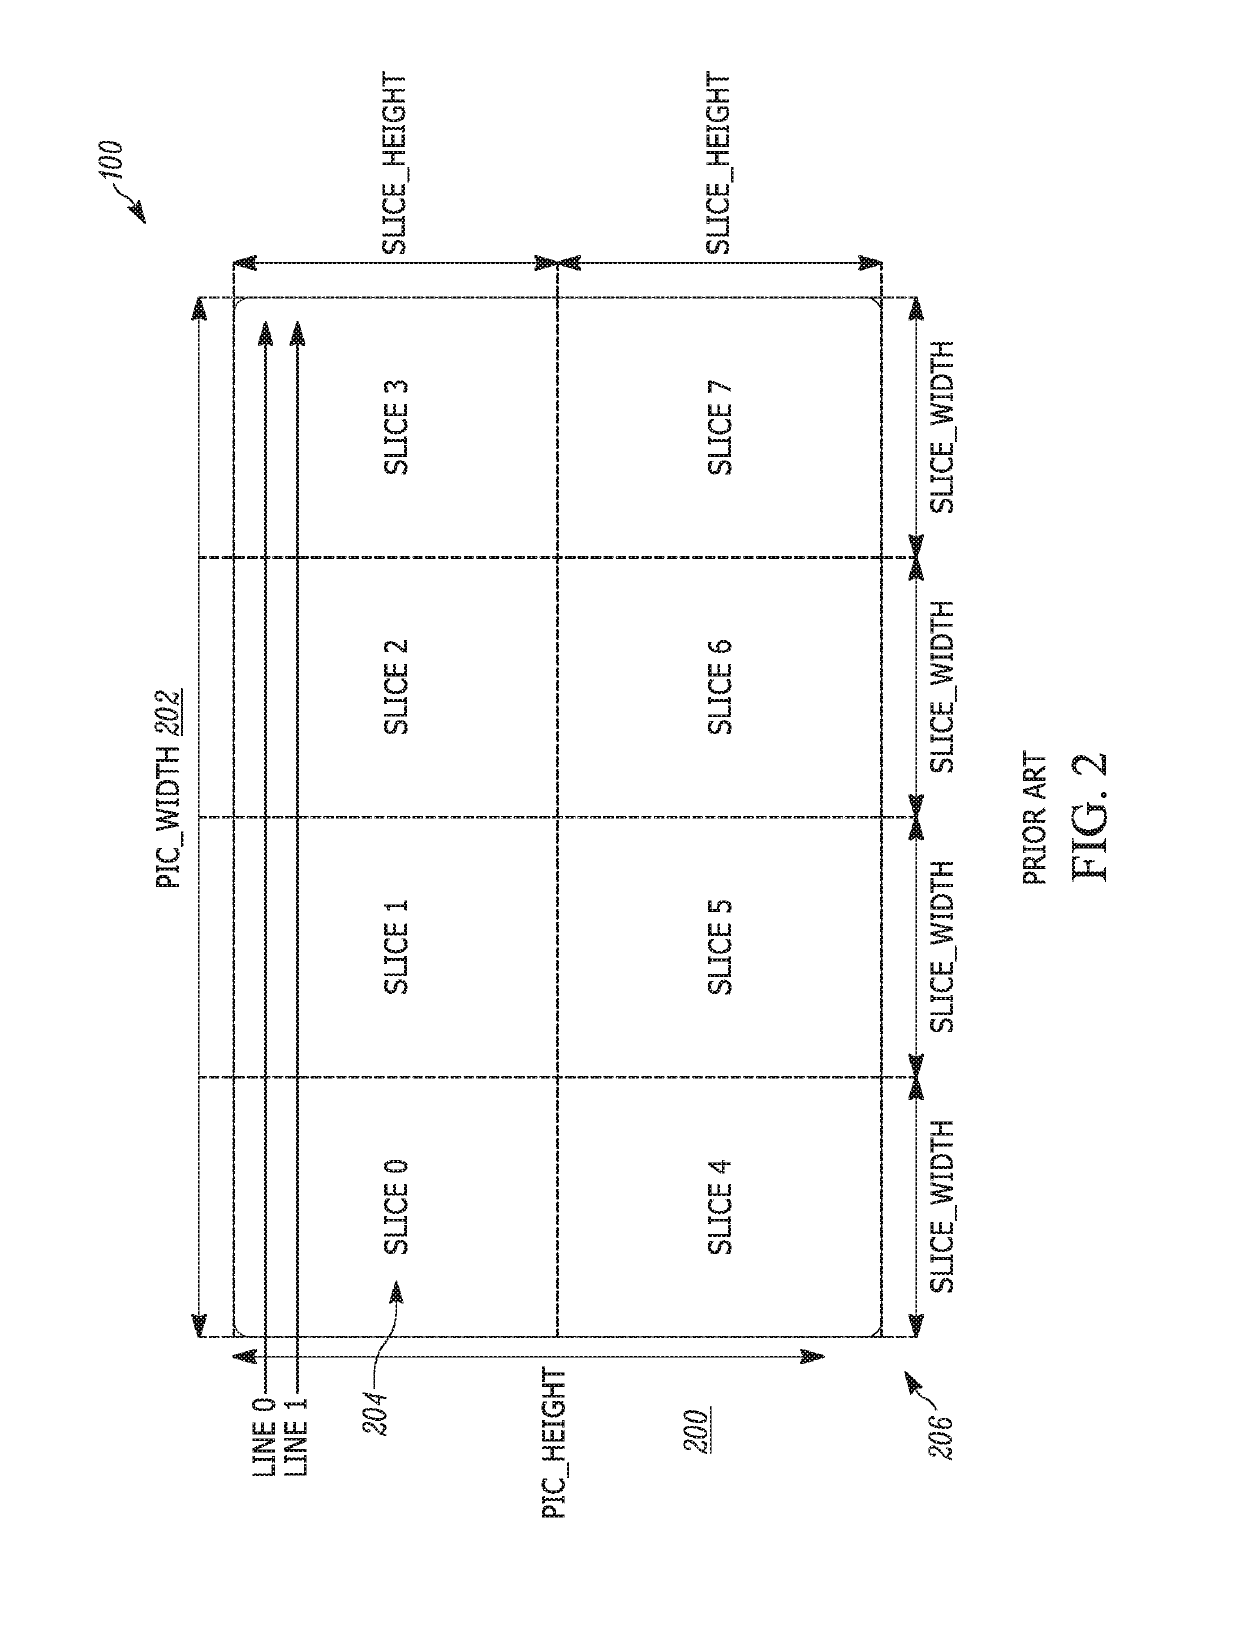 Method and apparatus for image compression that employs multiple indexed color history buffers